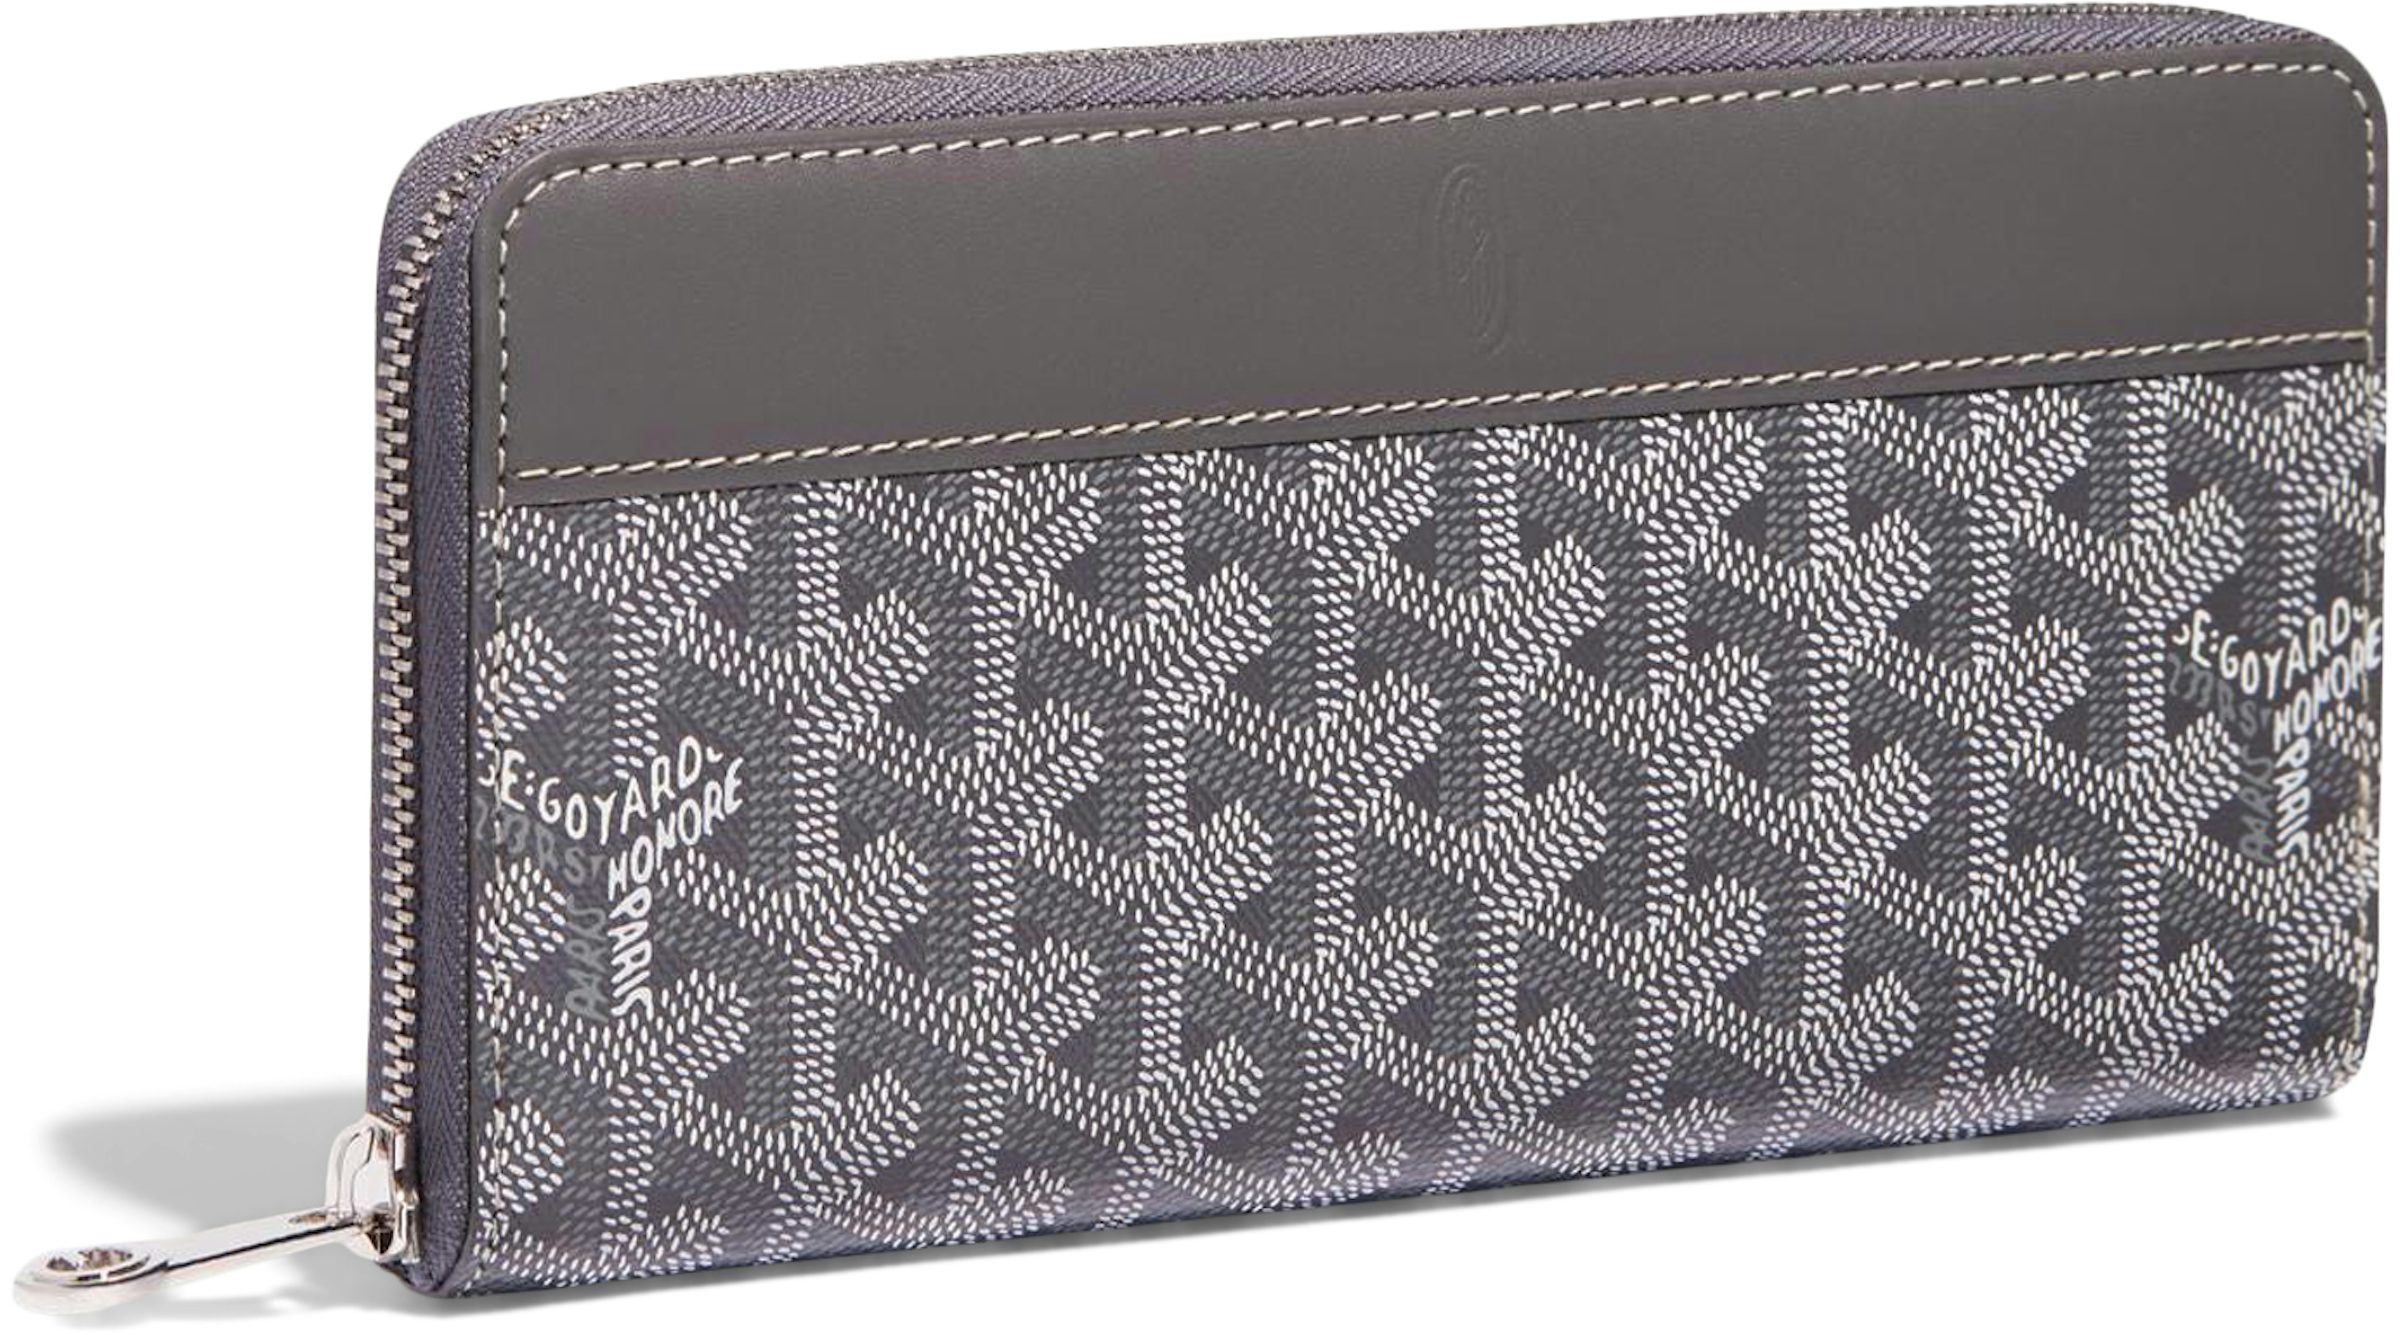 Review) Goyard Matignon PM Wallet - what I learned about buying small items  : r/WagoonLadies